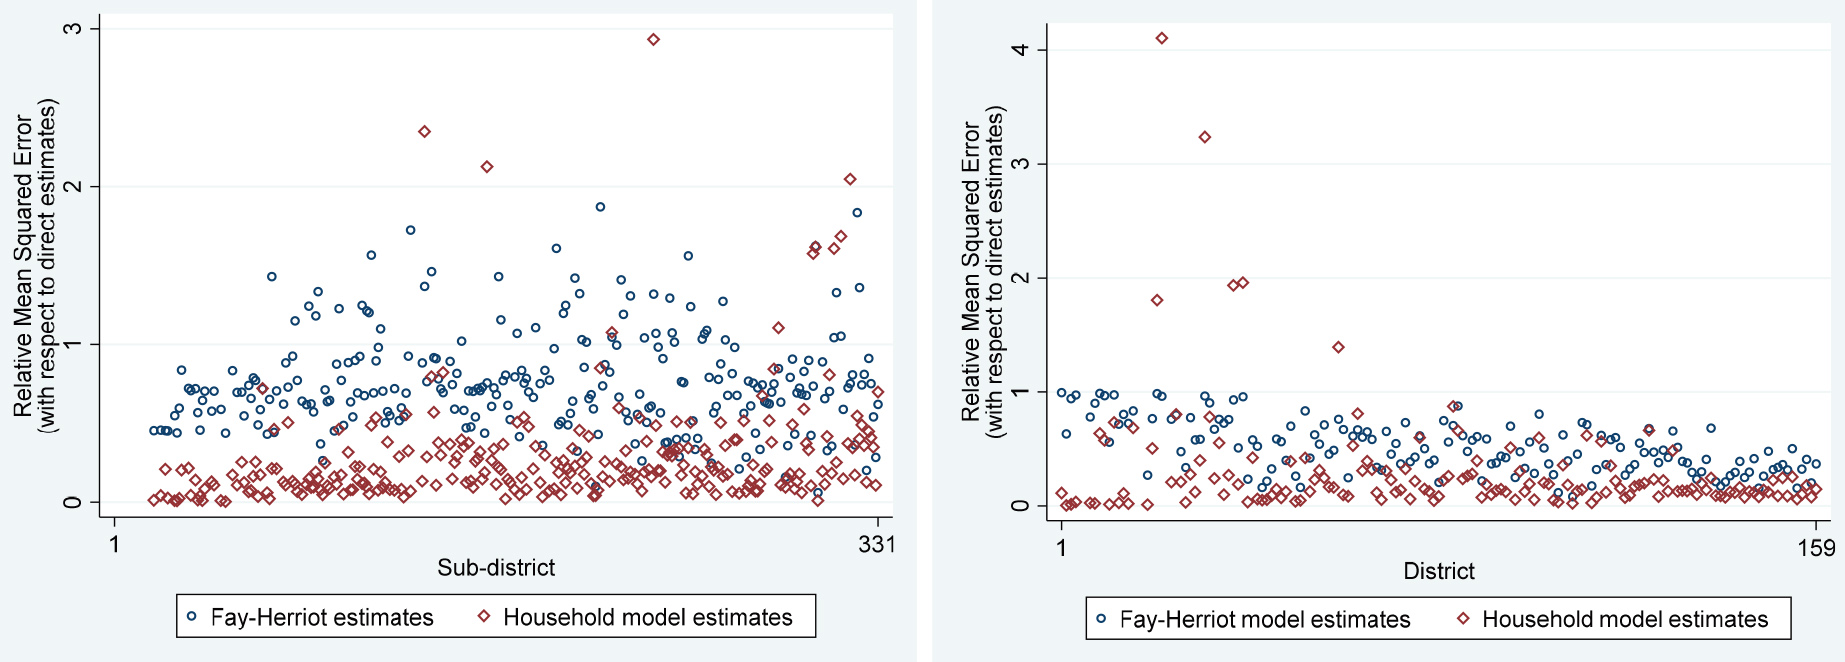 Comparison of estimated Relative Mean Square Error by area and method for Sri Lanka (left) and Tanzania (right). Notes: Figures show mean squared errors of predicted asset-based poverty rates generated by household-level model, Fay-Herriot model, and Direct Survey estimates. Direct survey estimate MSEs top-coded at 0.015.